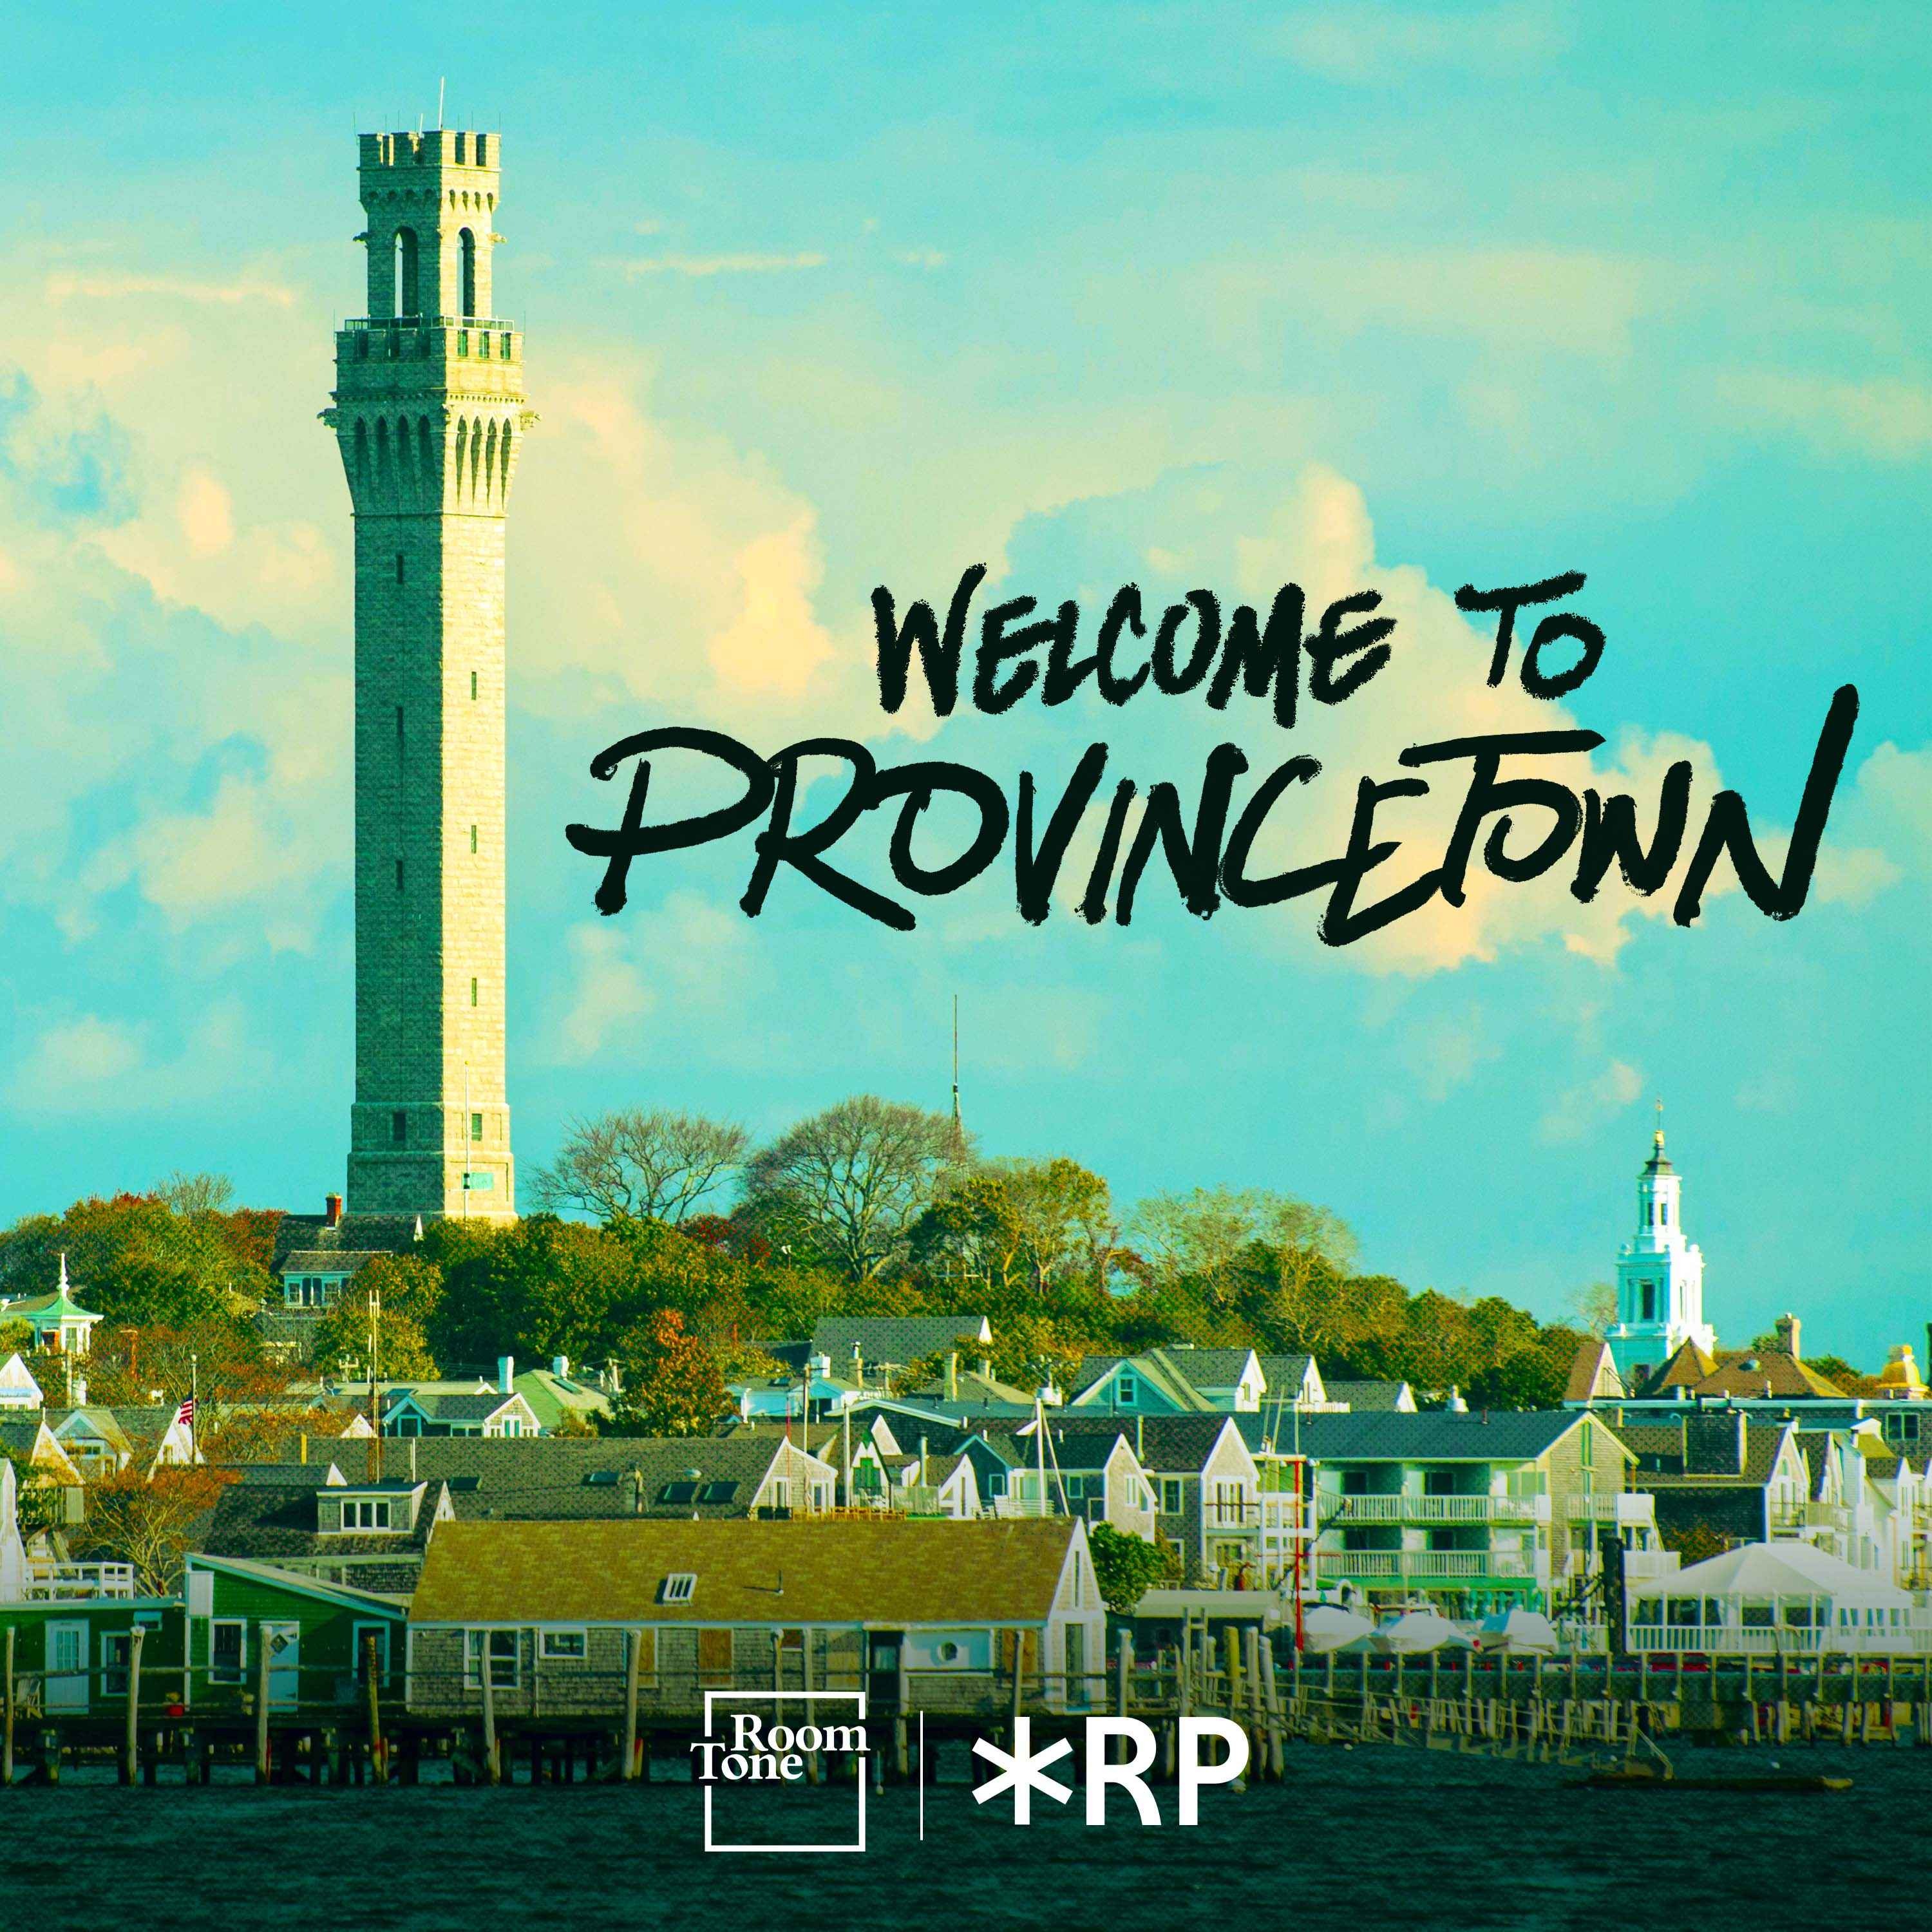 Welcome to Provincetown